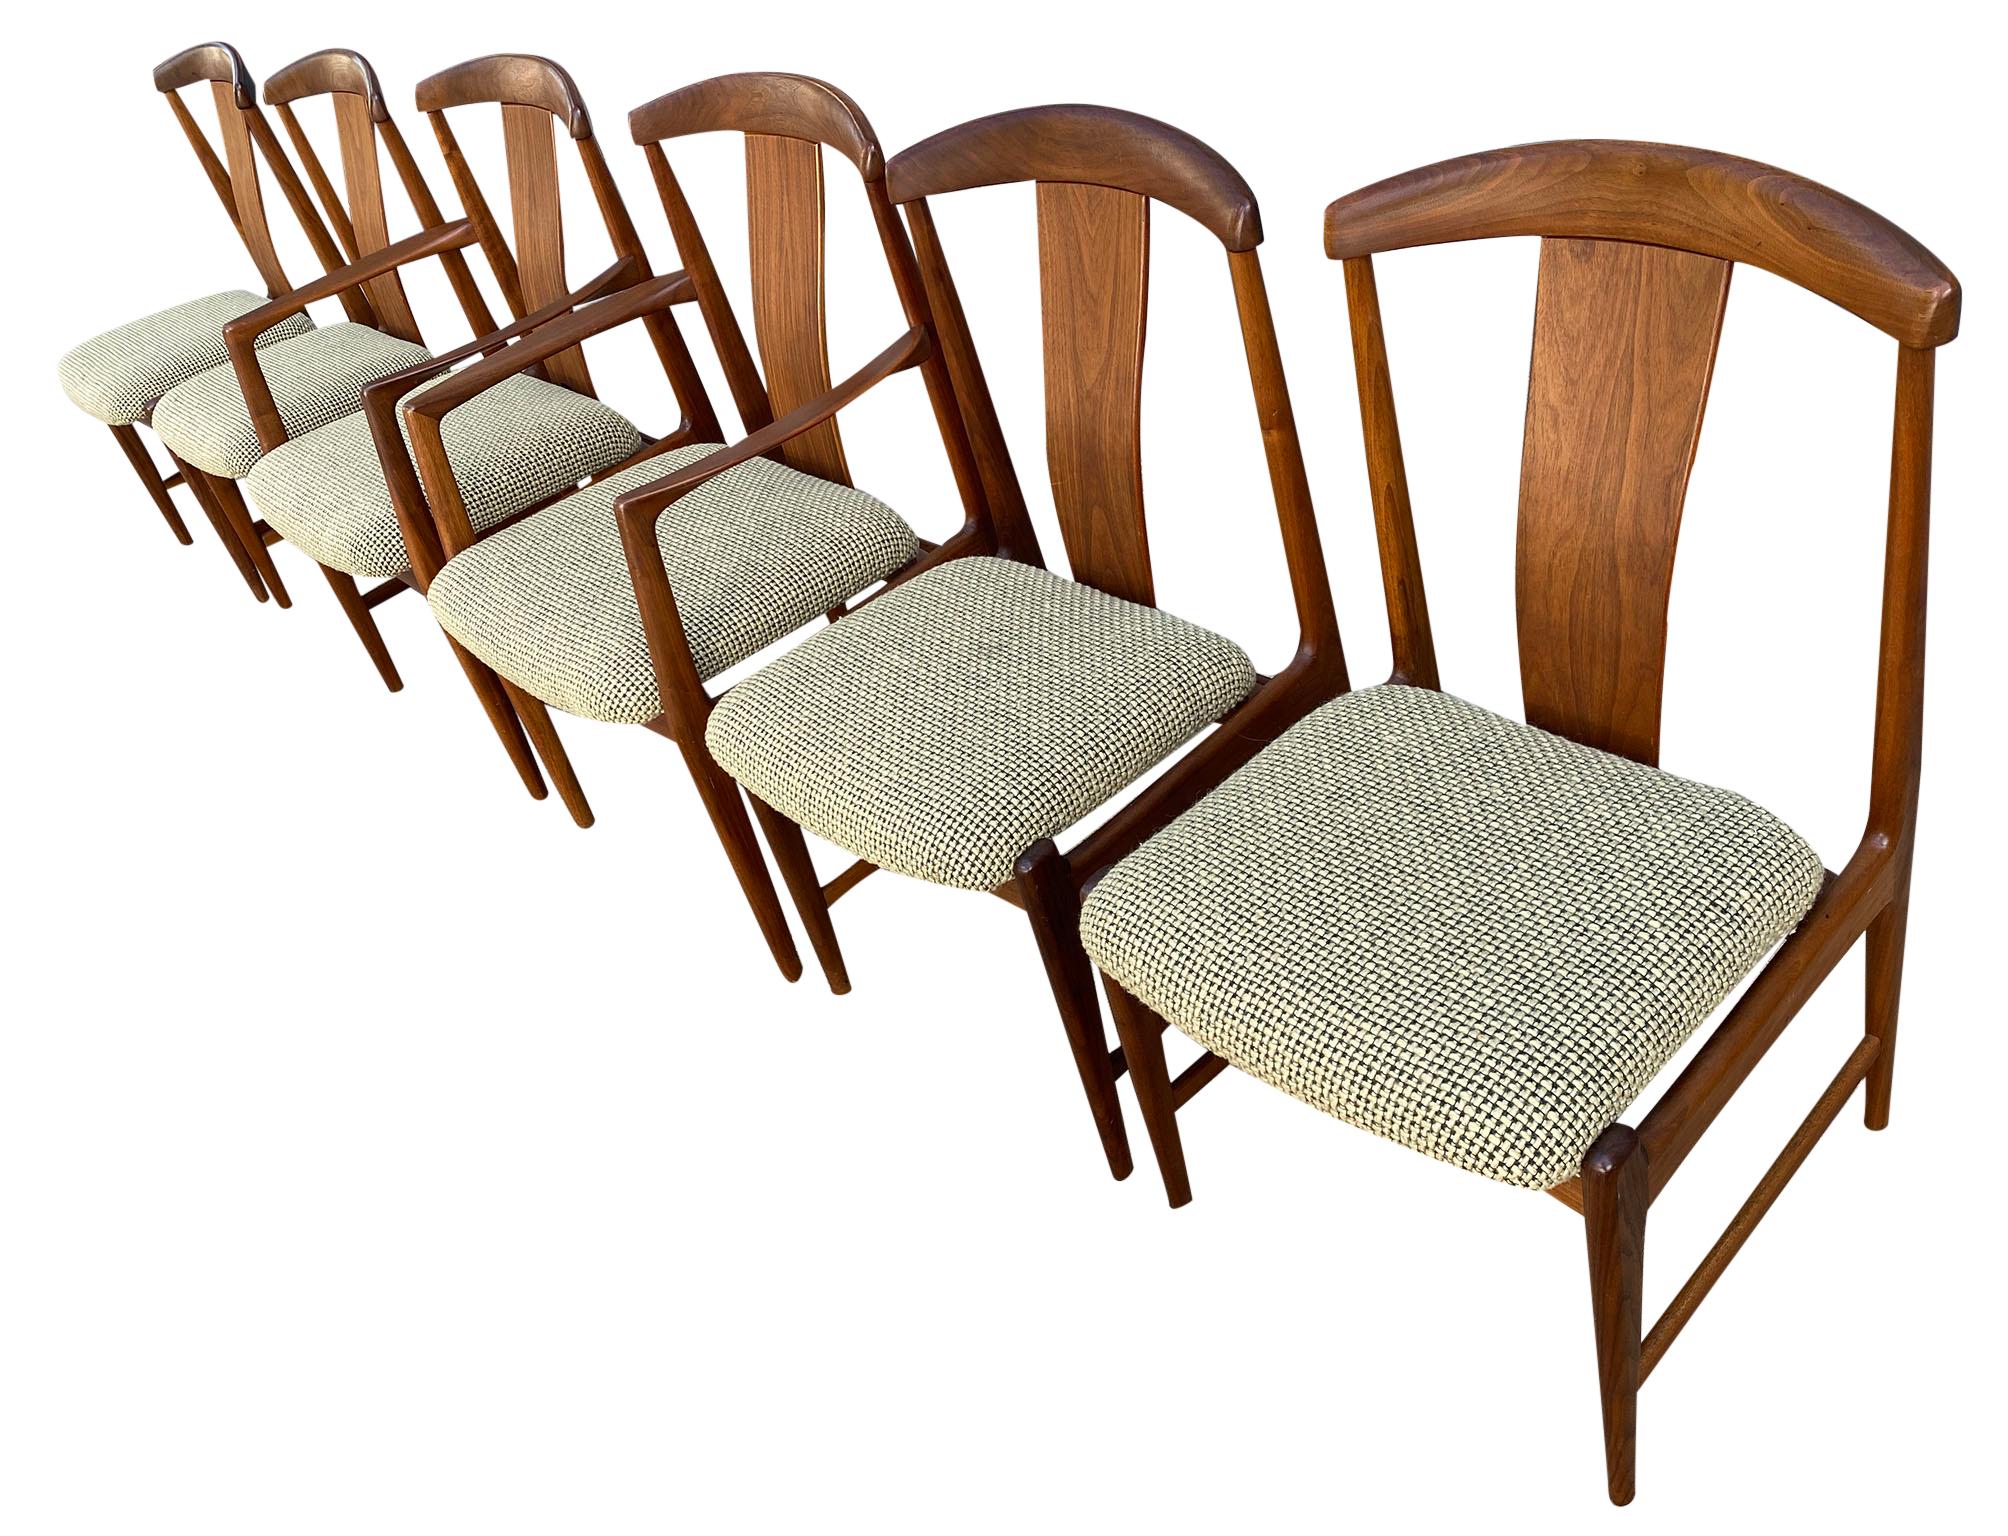 Swedish Midcentury Set of 6 Teak Dining Chairs by Folke Ohlsson for DUX